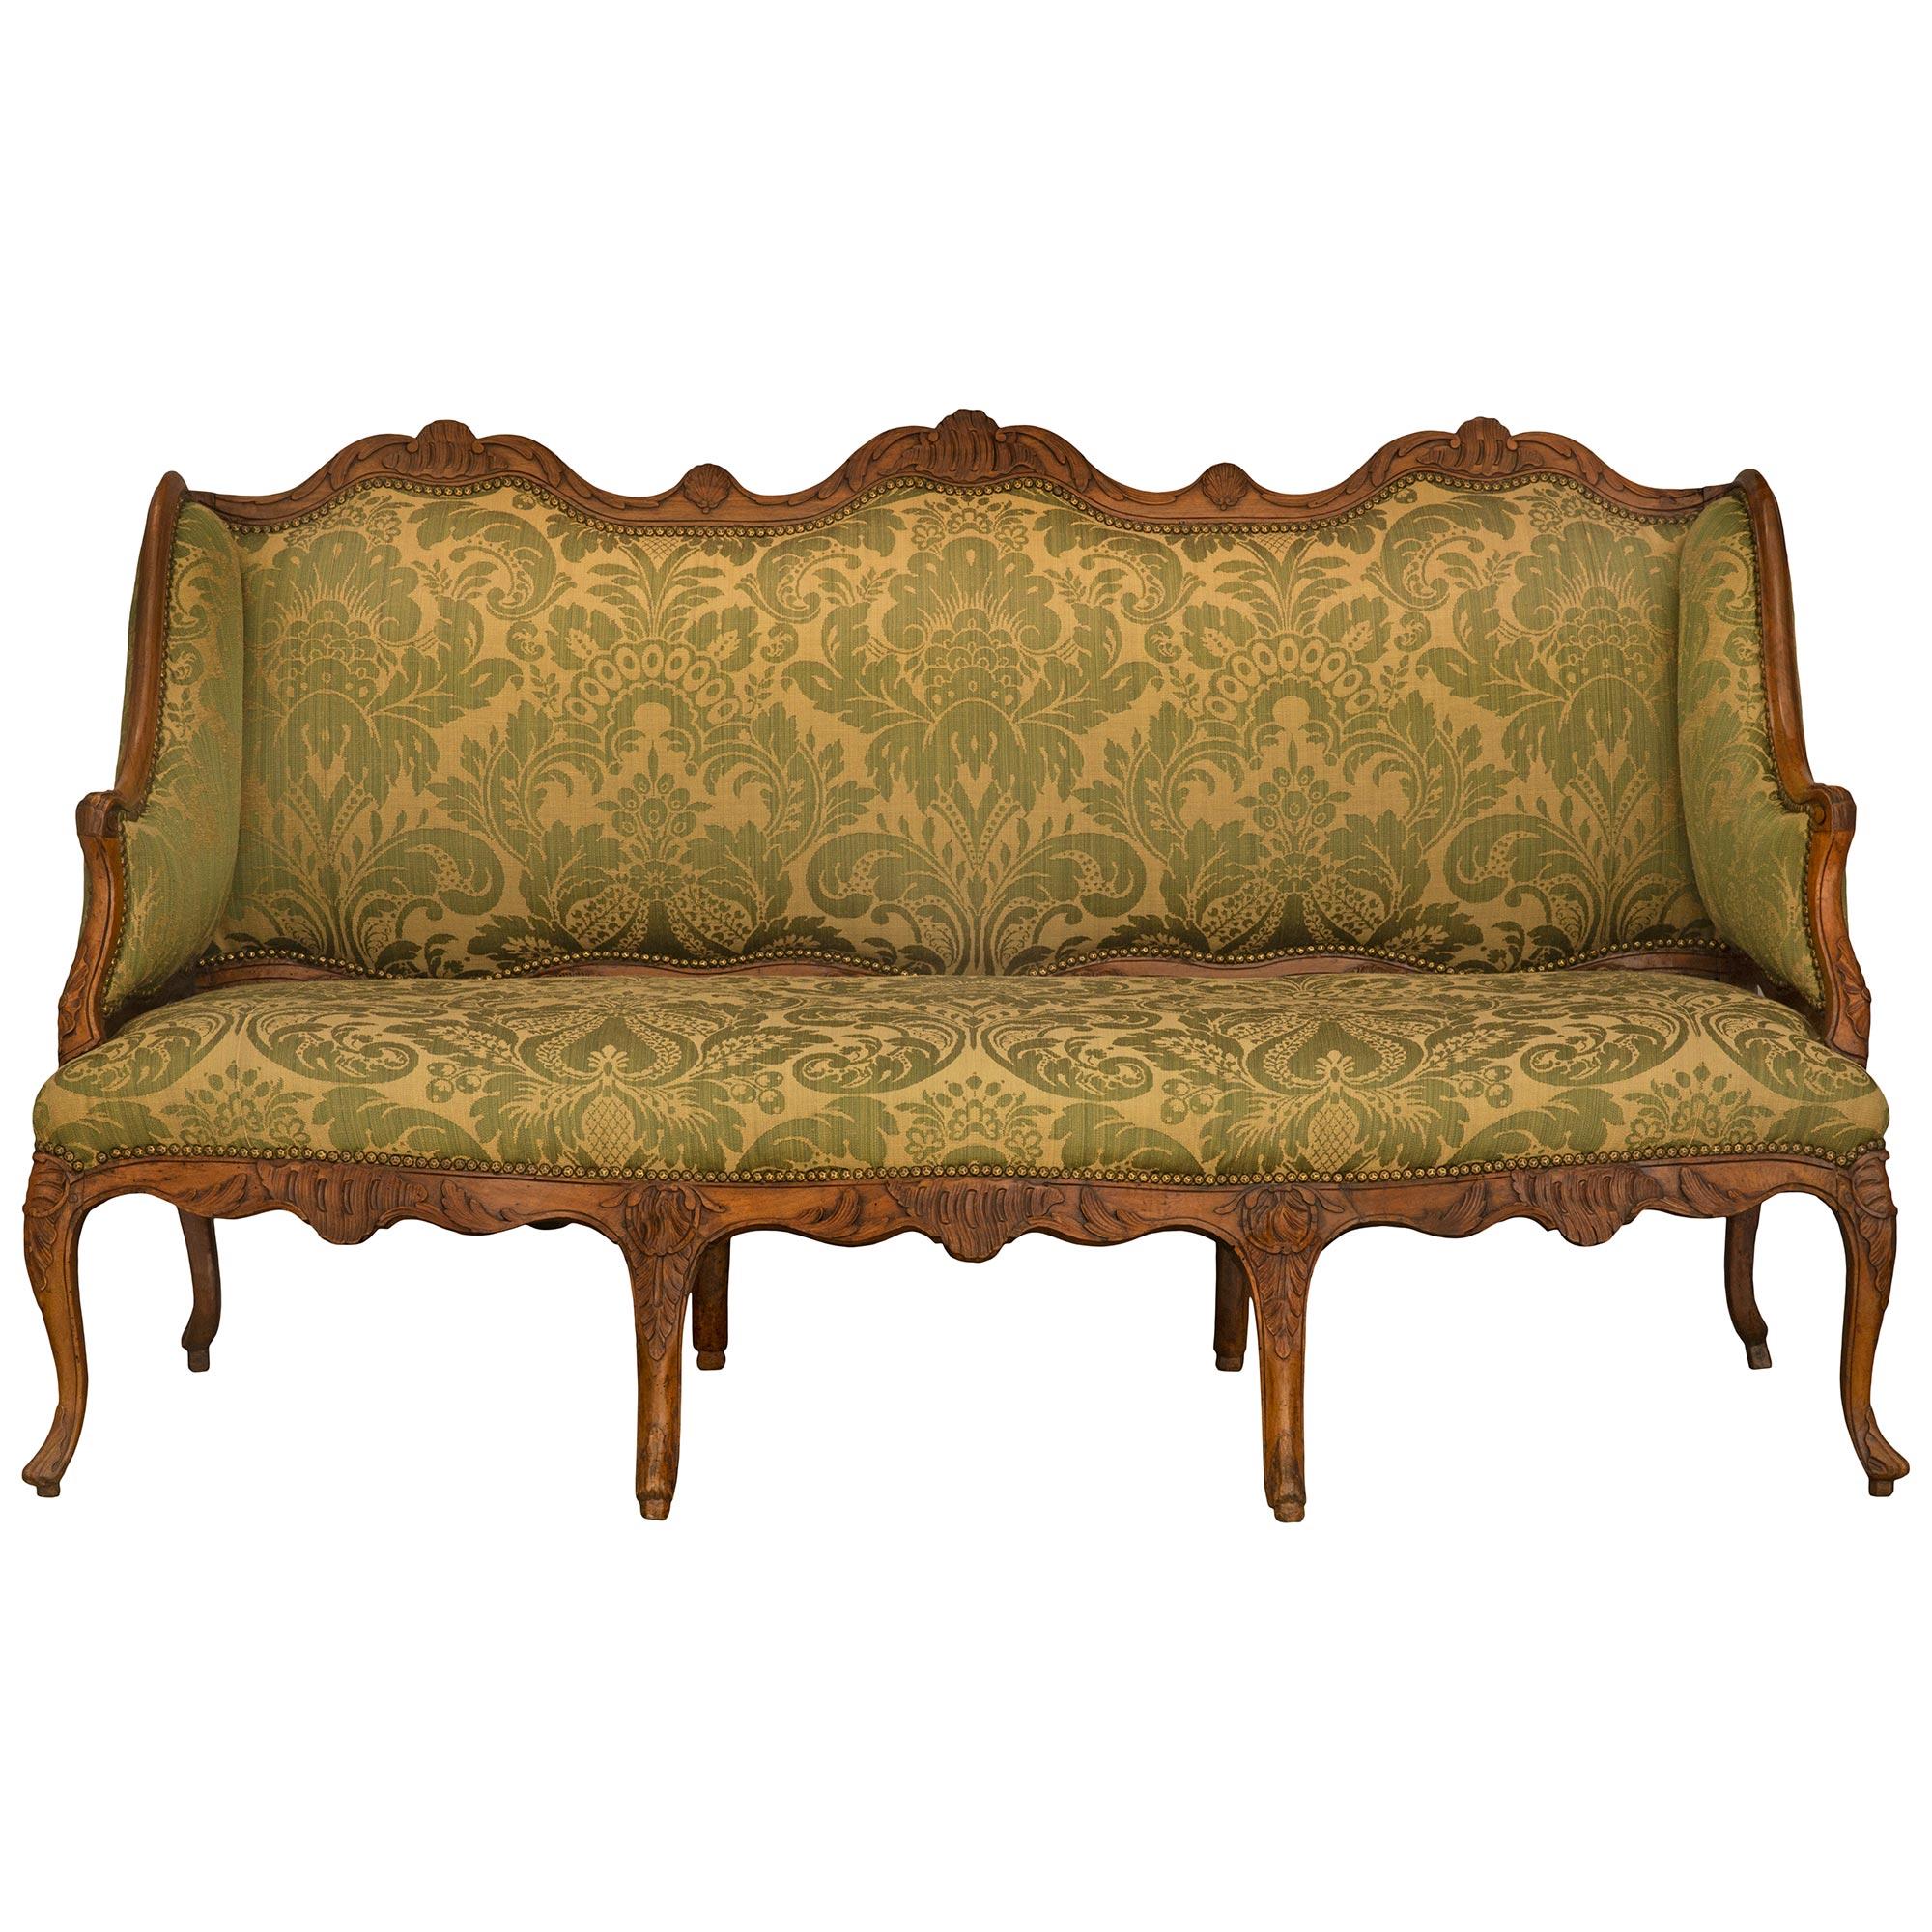 A large and richly carved French 18th century Louis XV period Walnut settee In Good Condition For Sale In West Palm Beach, FL